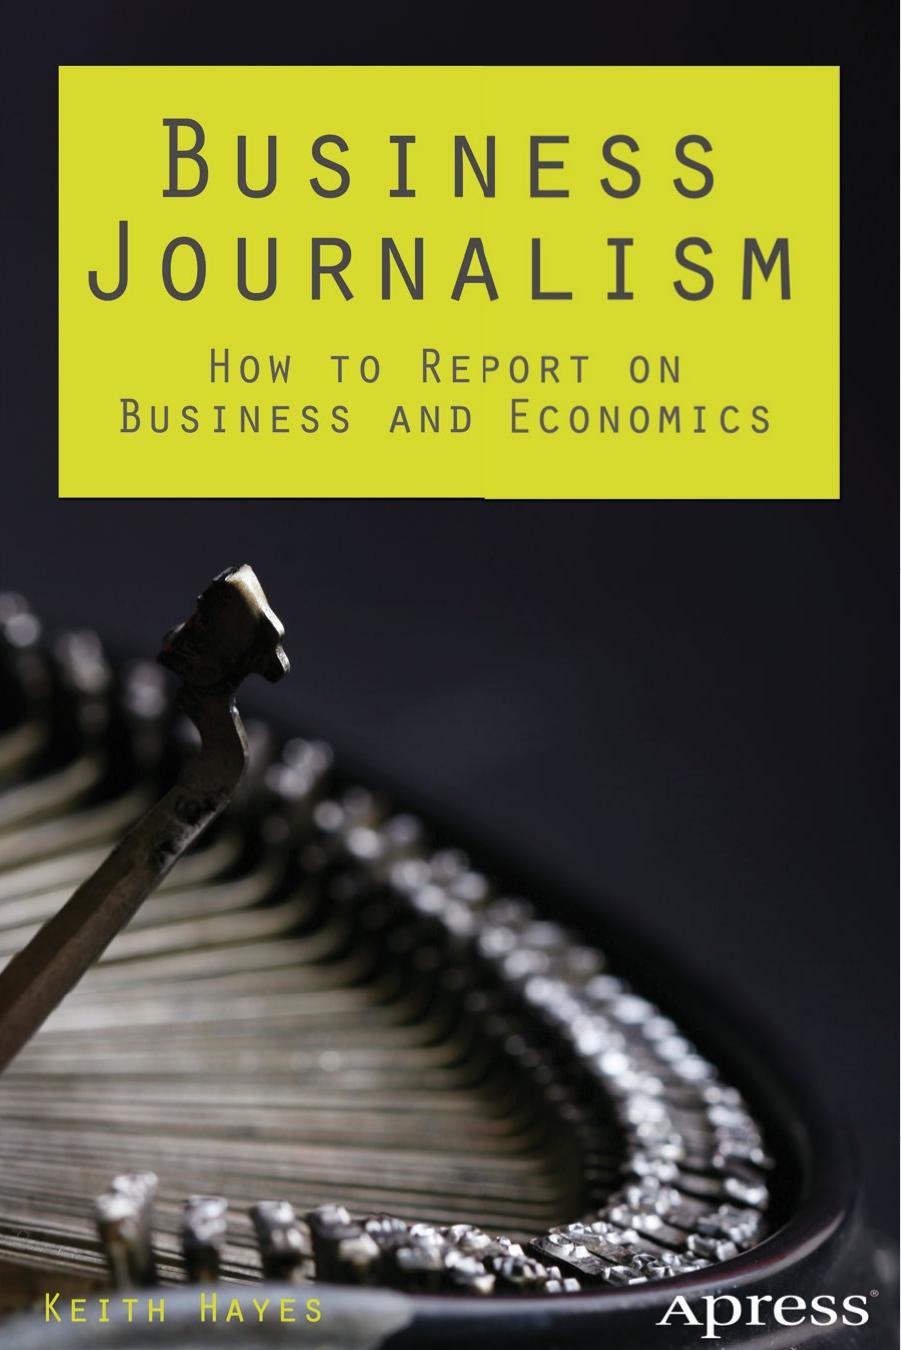 Business Journalism How to Report on Business and Economics 2014